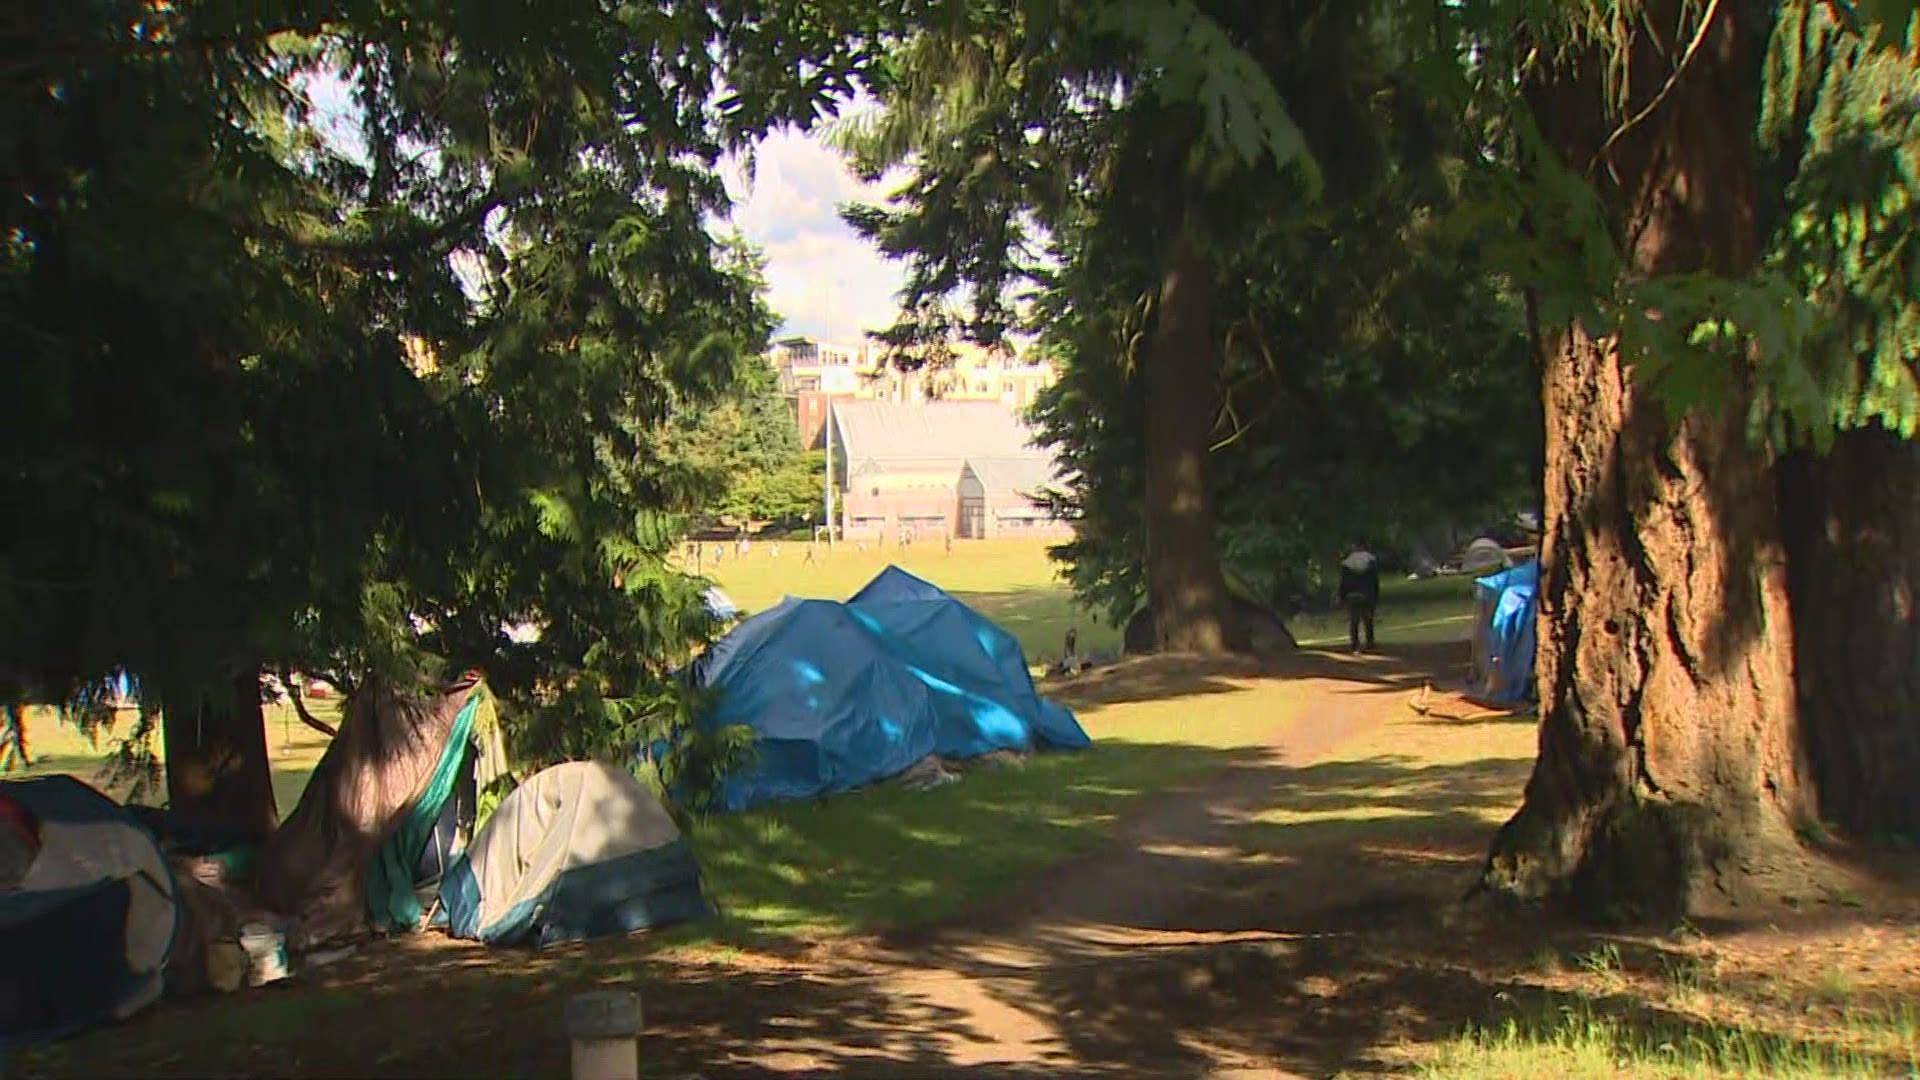 The homeless encampment near Broadview Thomson K-8 is drawing attention from more Seattle mayoral candidates who say the city needs to step in.